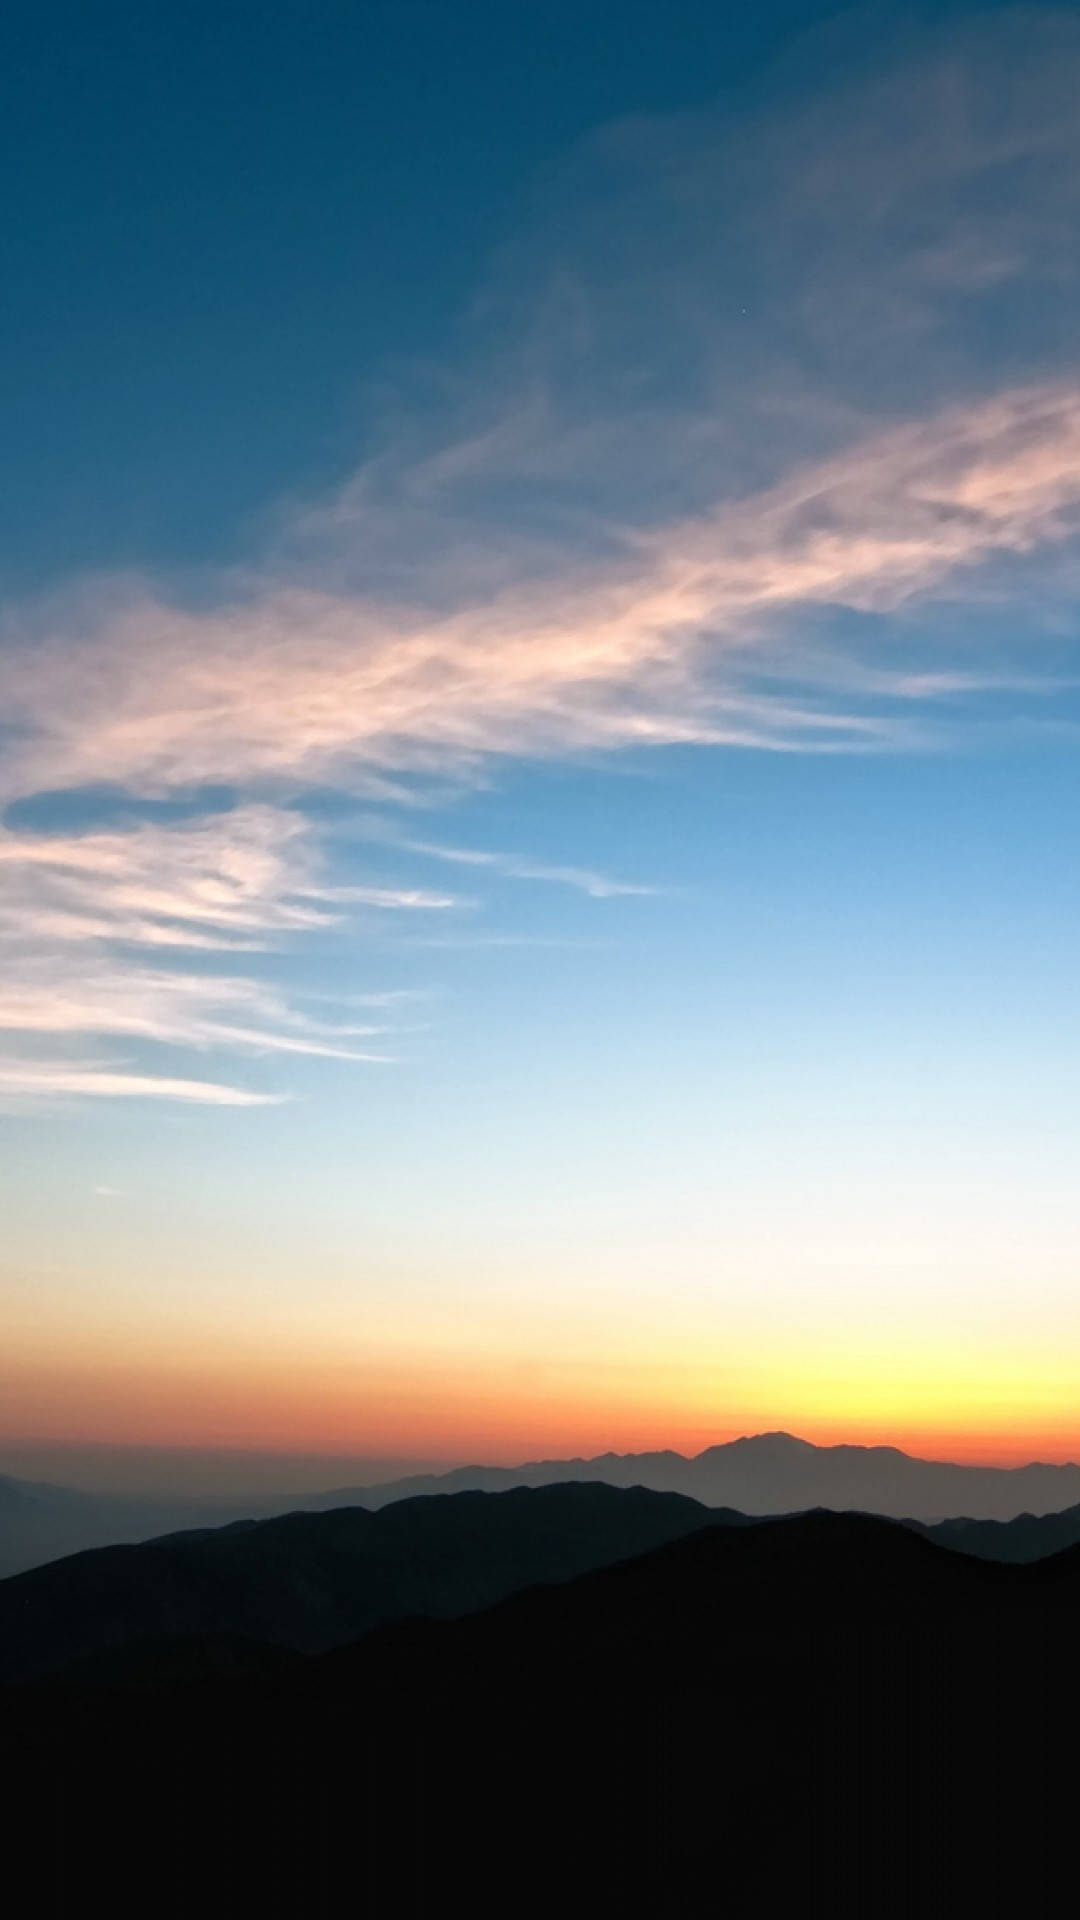 Iphone California Sunset Mountains Silhouette Wallpaper